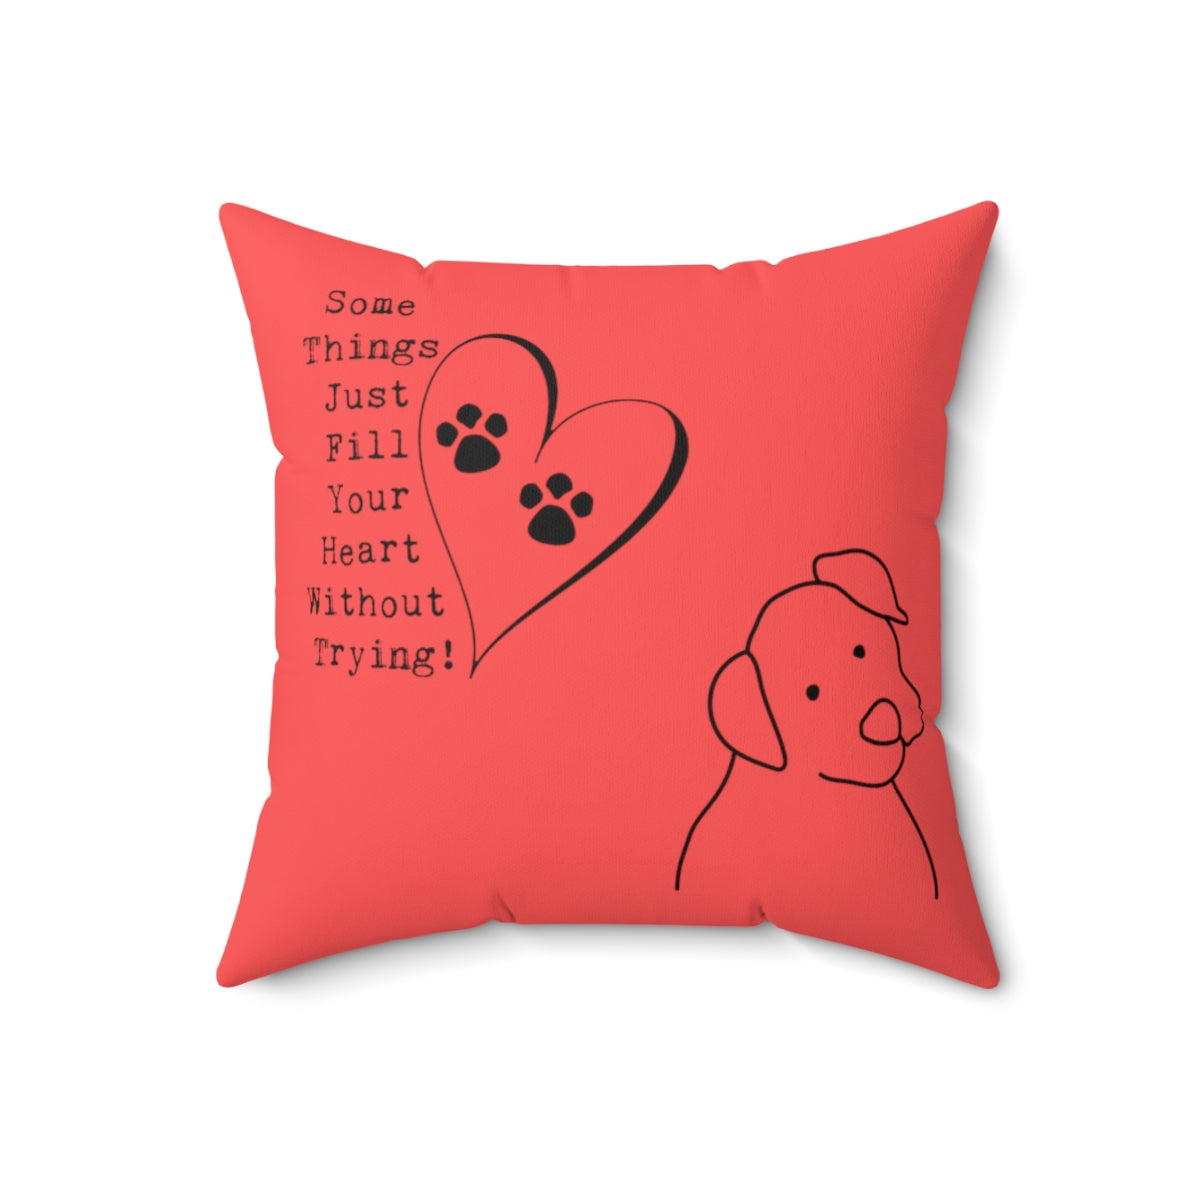 Coral Square Pillow Case - Some Things Fill Your Heart Without Trying - Home Decor Pillow Cover - Accent Pillow Cover